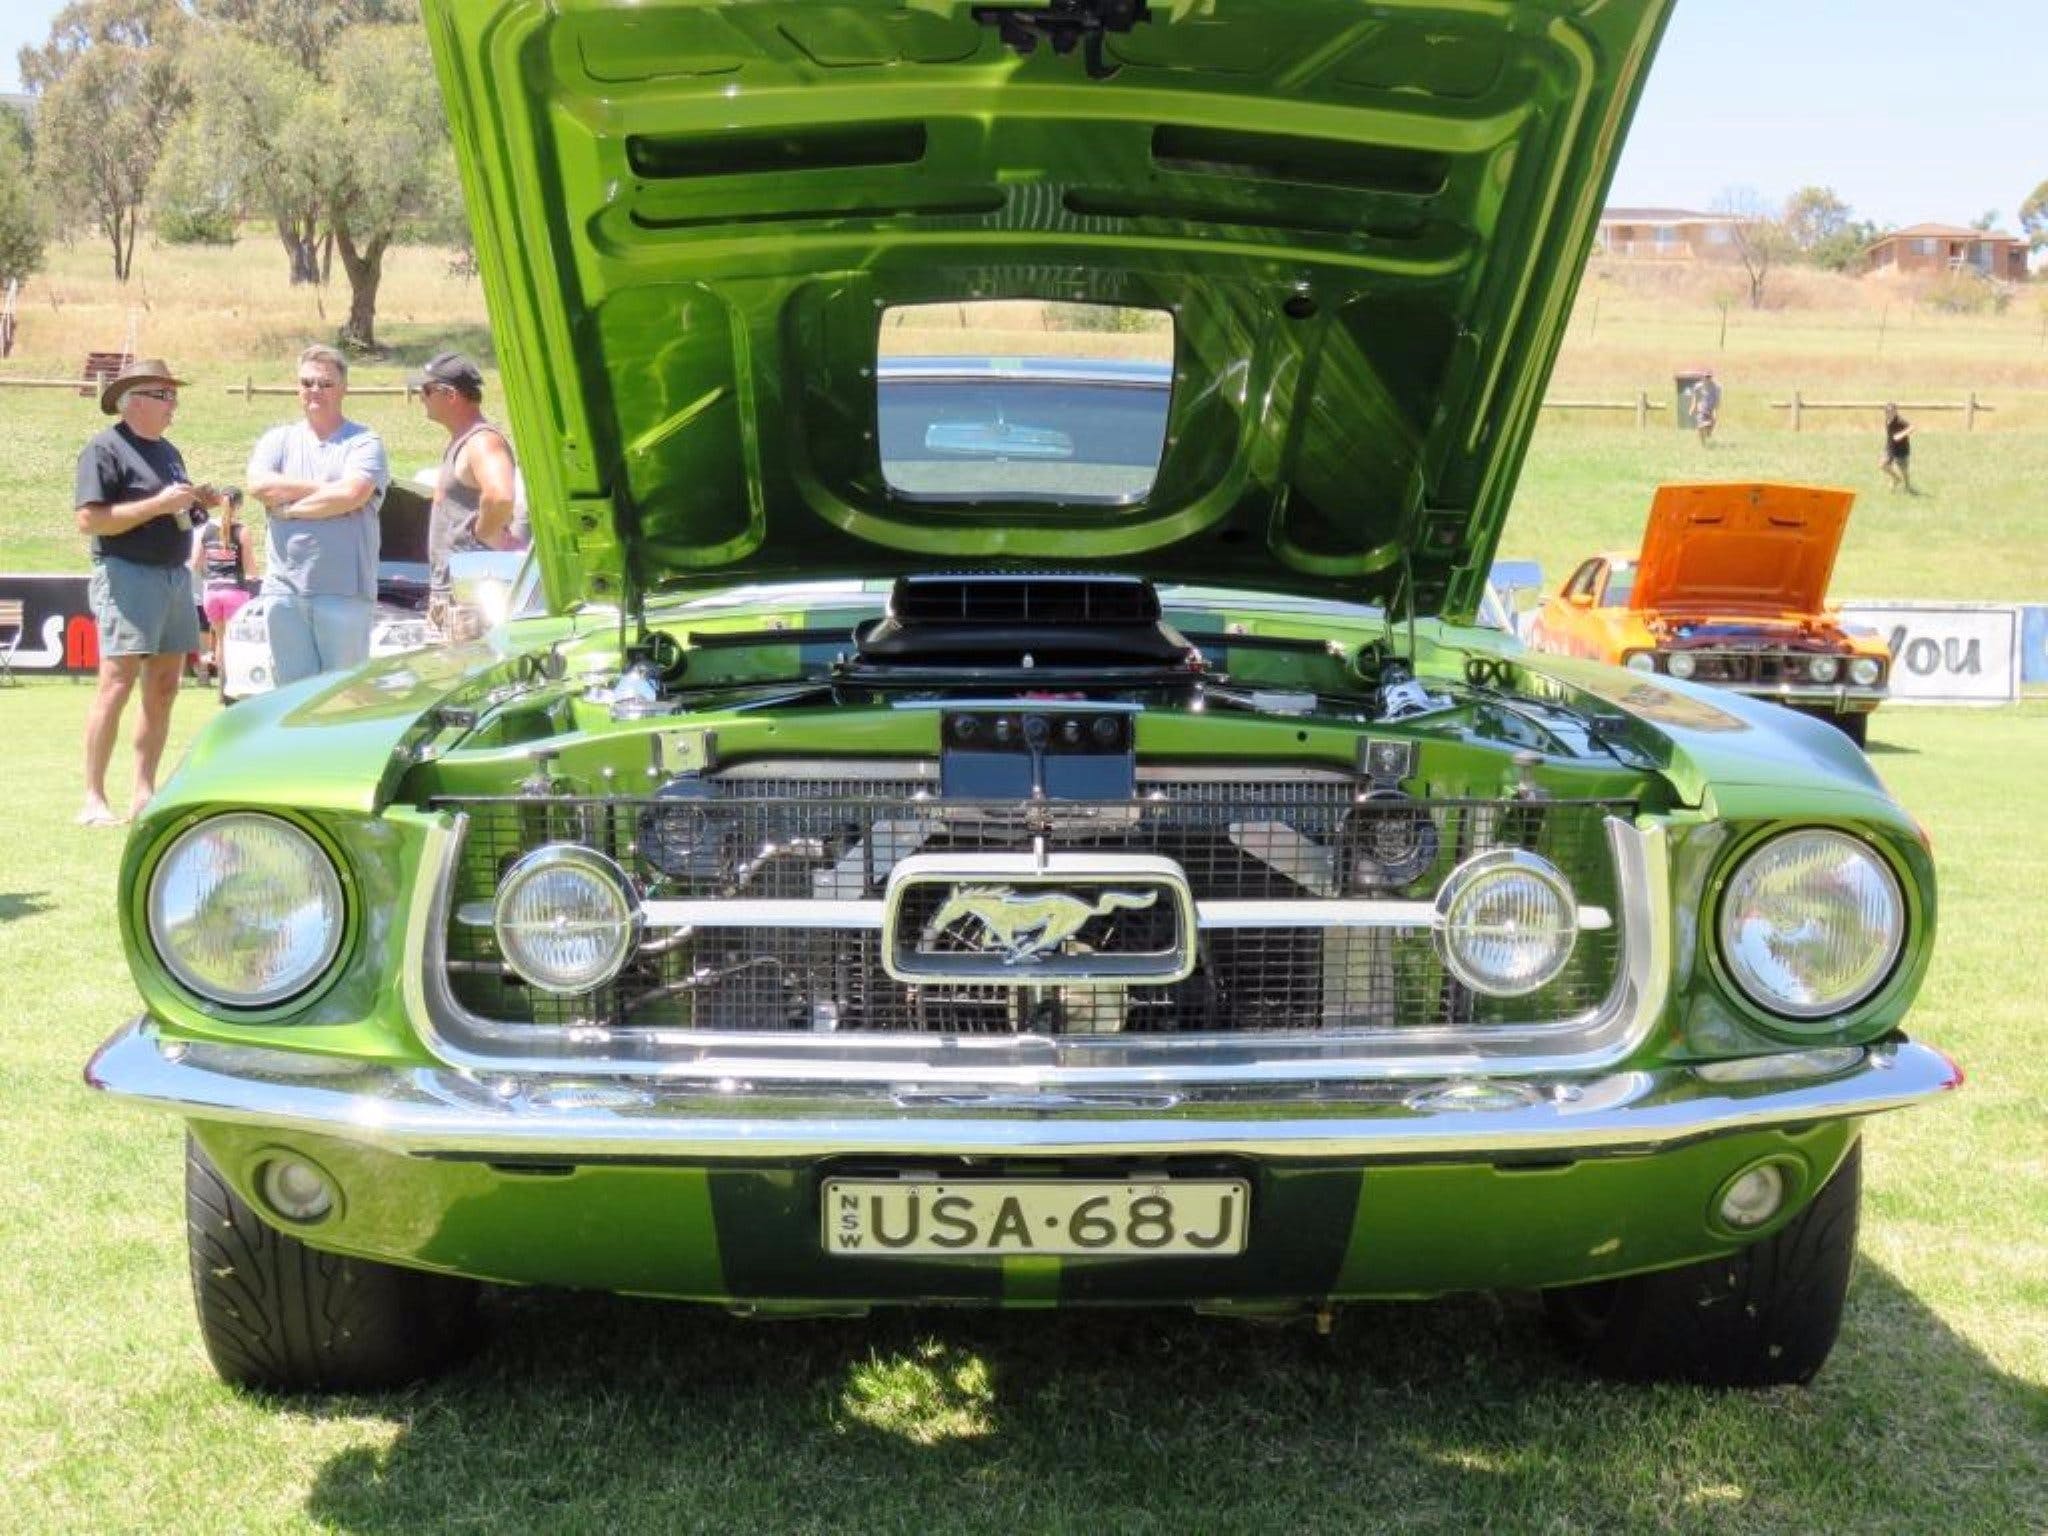 Central West Car Club Charity Show and Shine - Carnarvon Accommodation